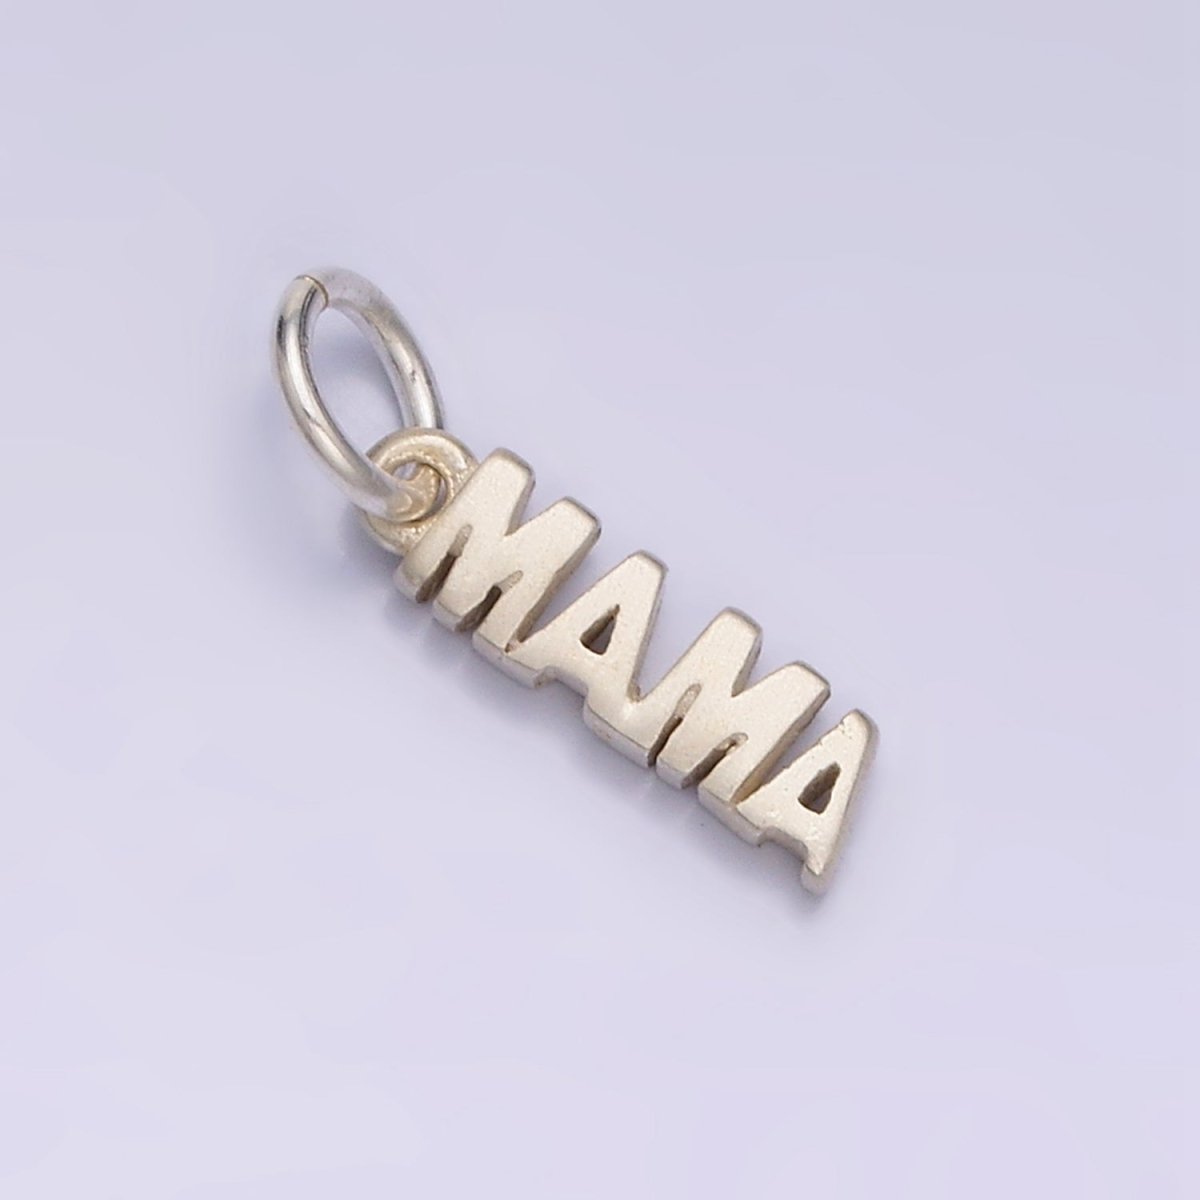 Dainty Mama Charm 18k Gold Filled Mama Charm for Bracelet Necklace Earring Component Diy Jewelry Making Supply E-140 - DLUXCA